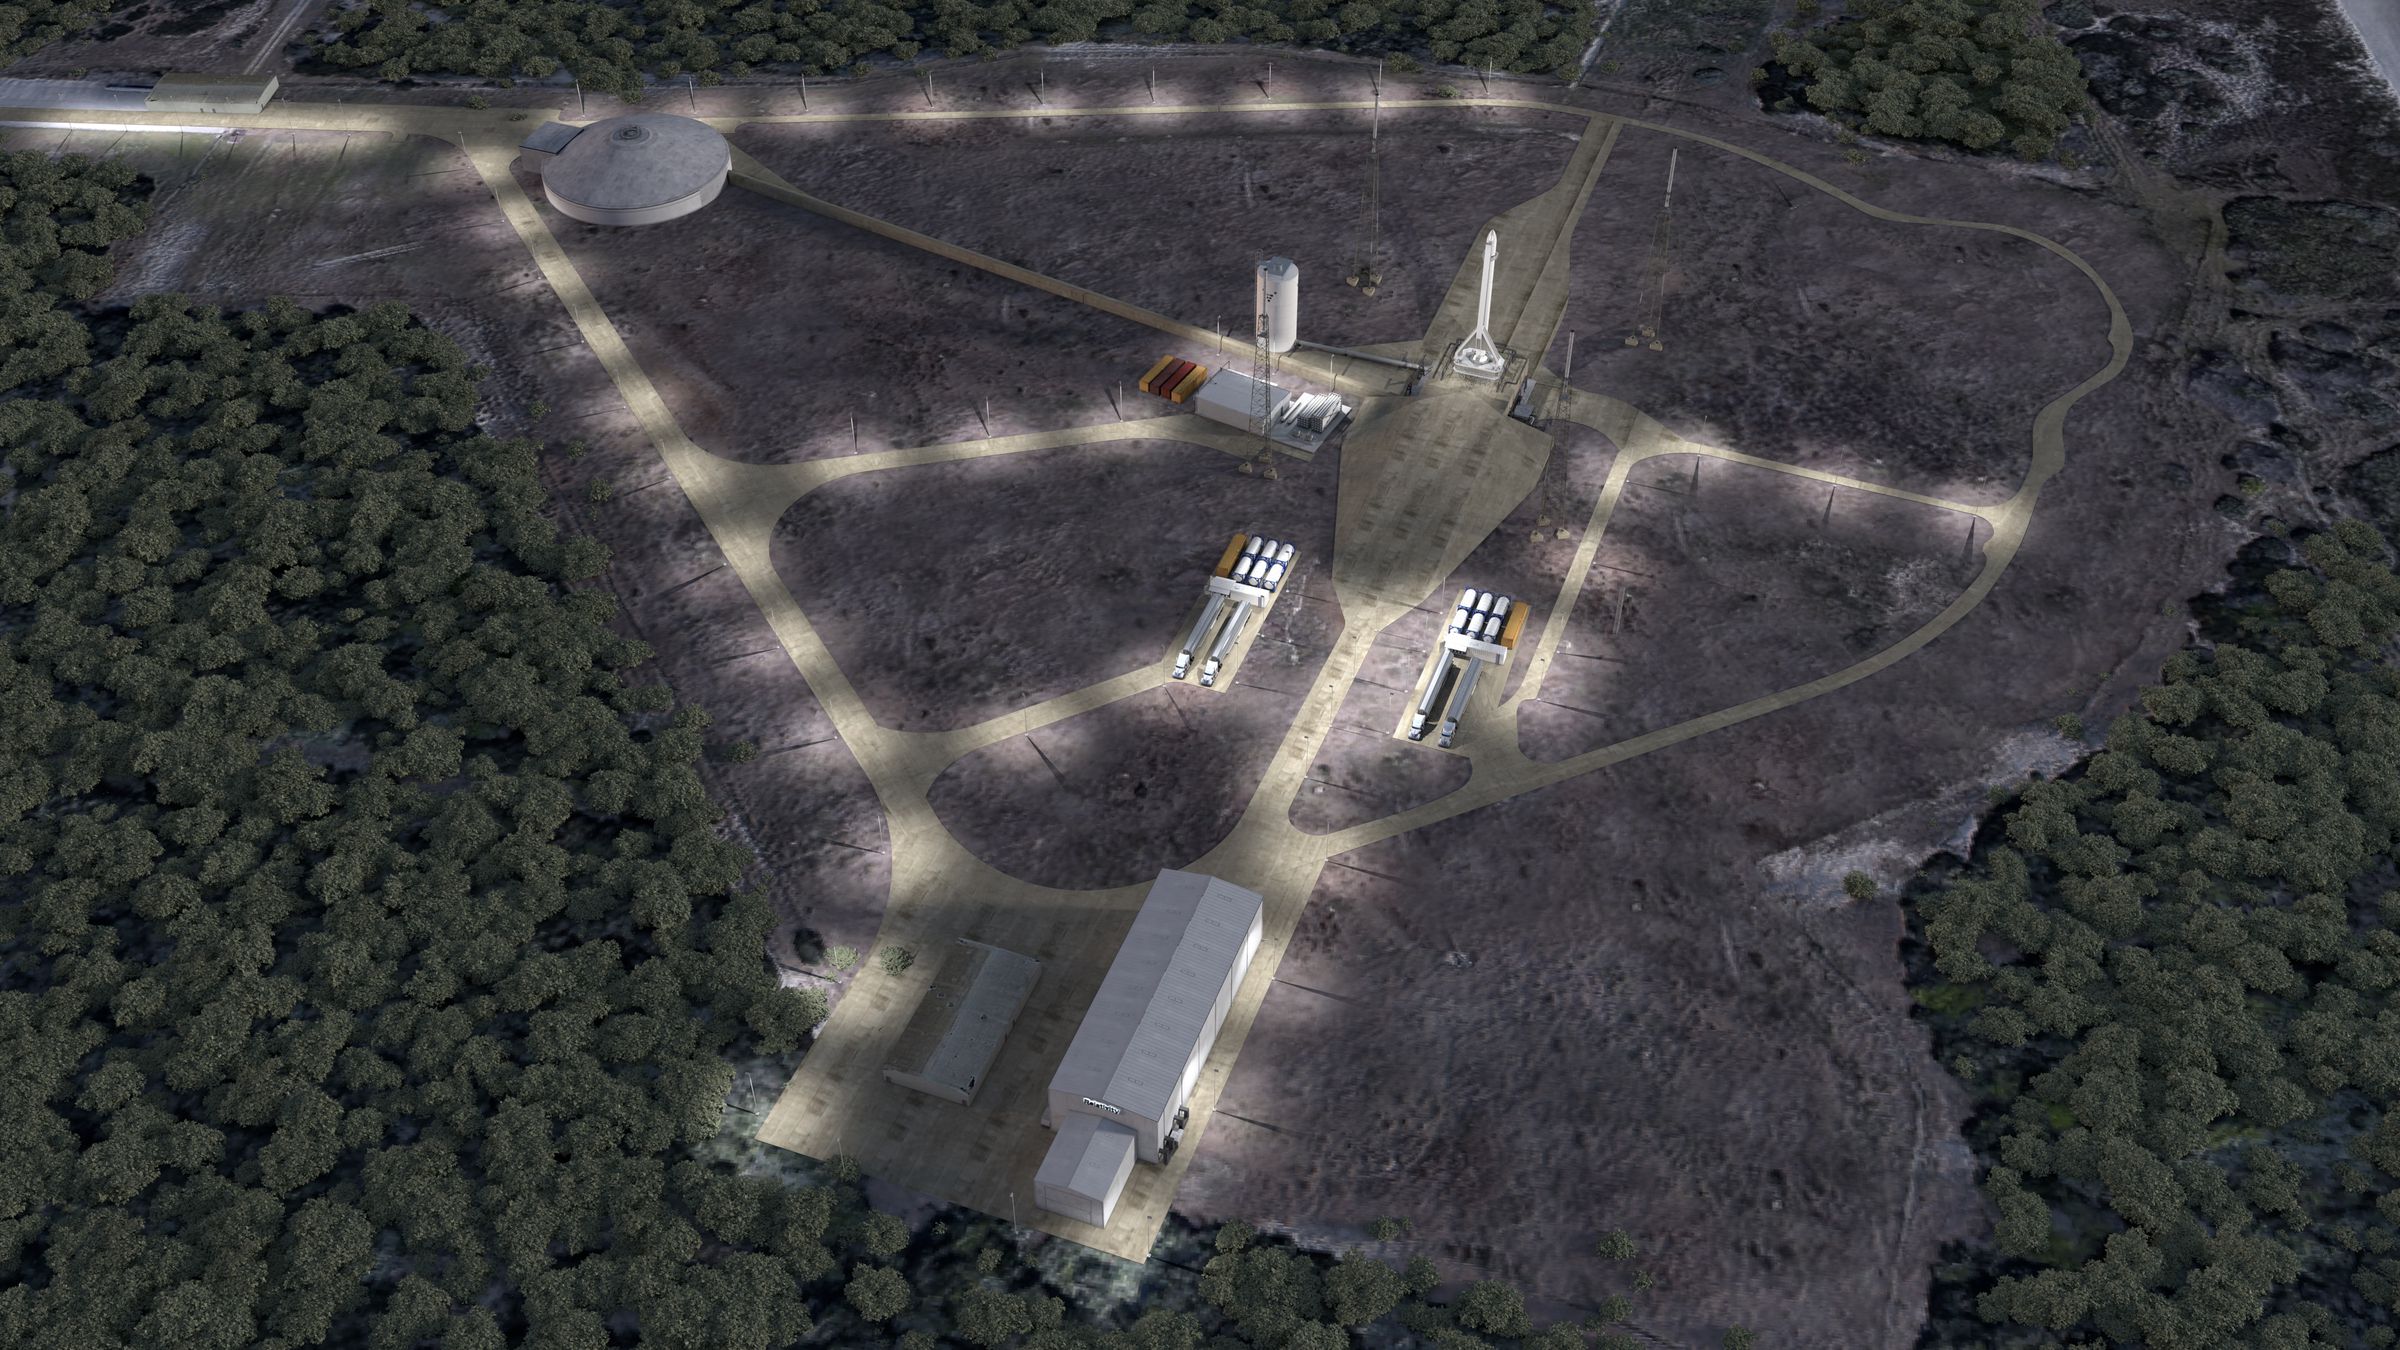 A rendering of what Relativity Space’s pad at LC-16 should look like.